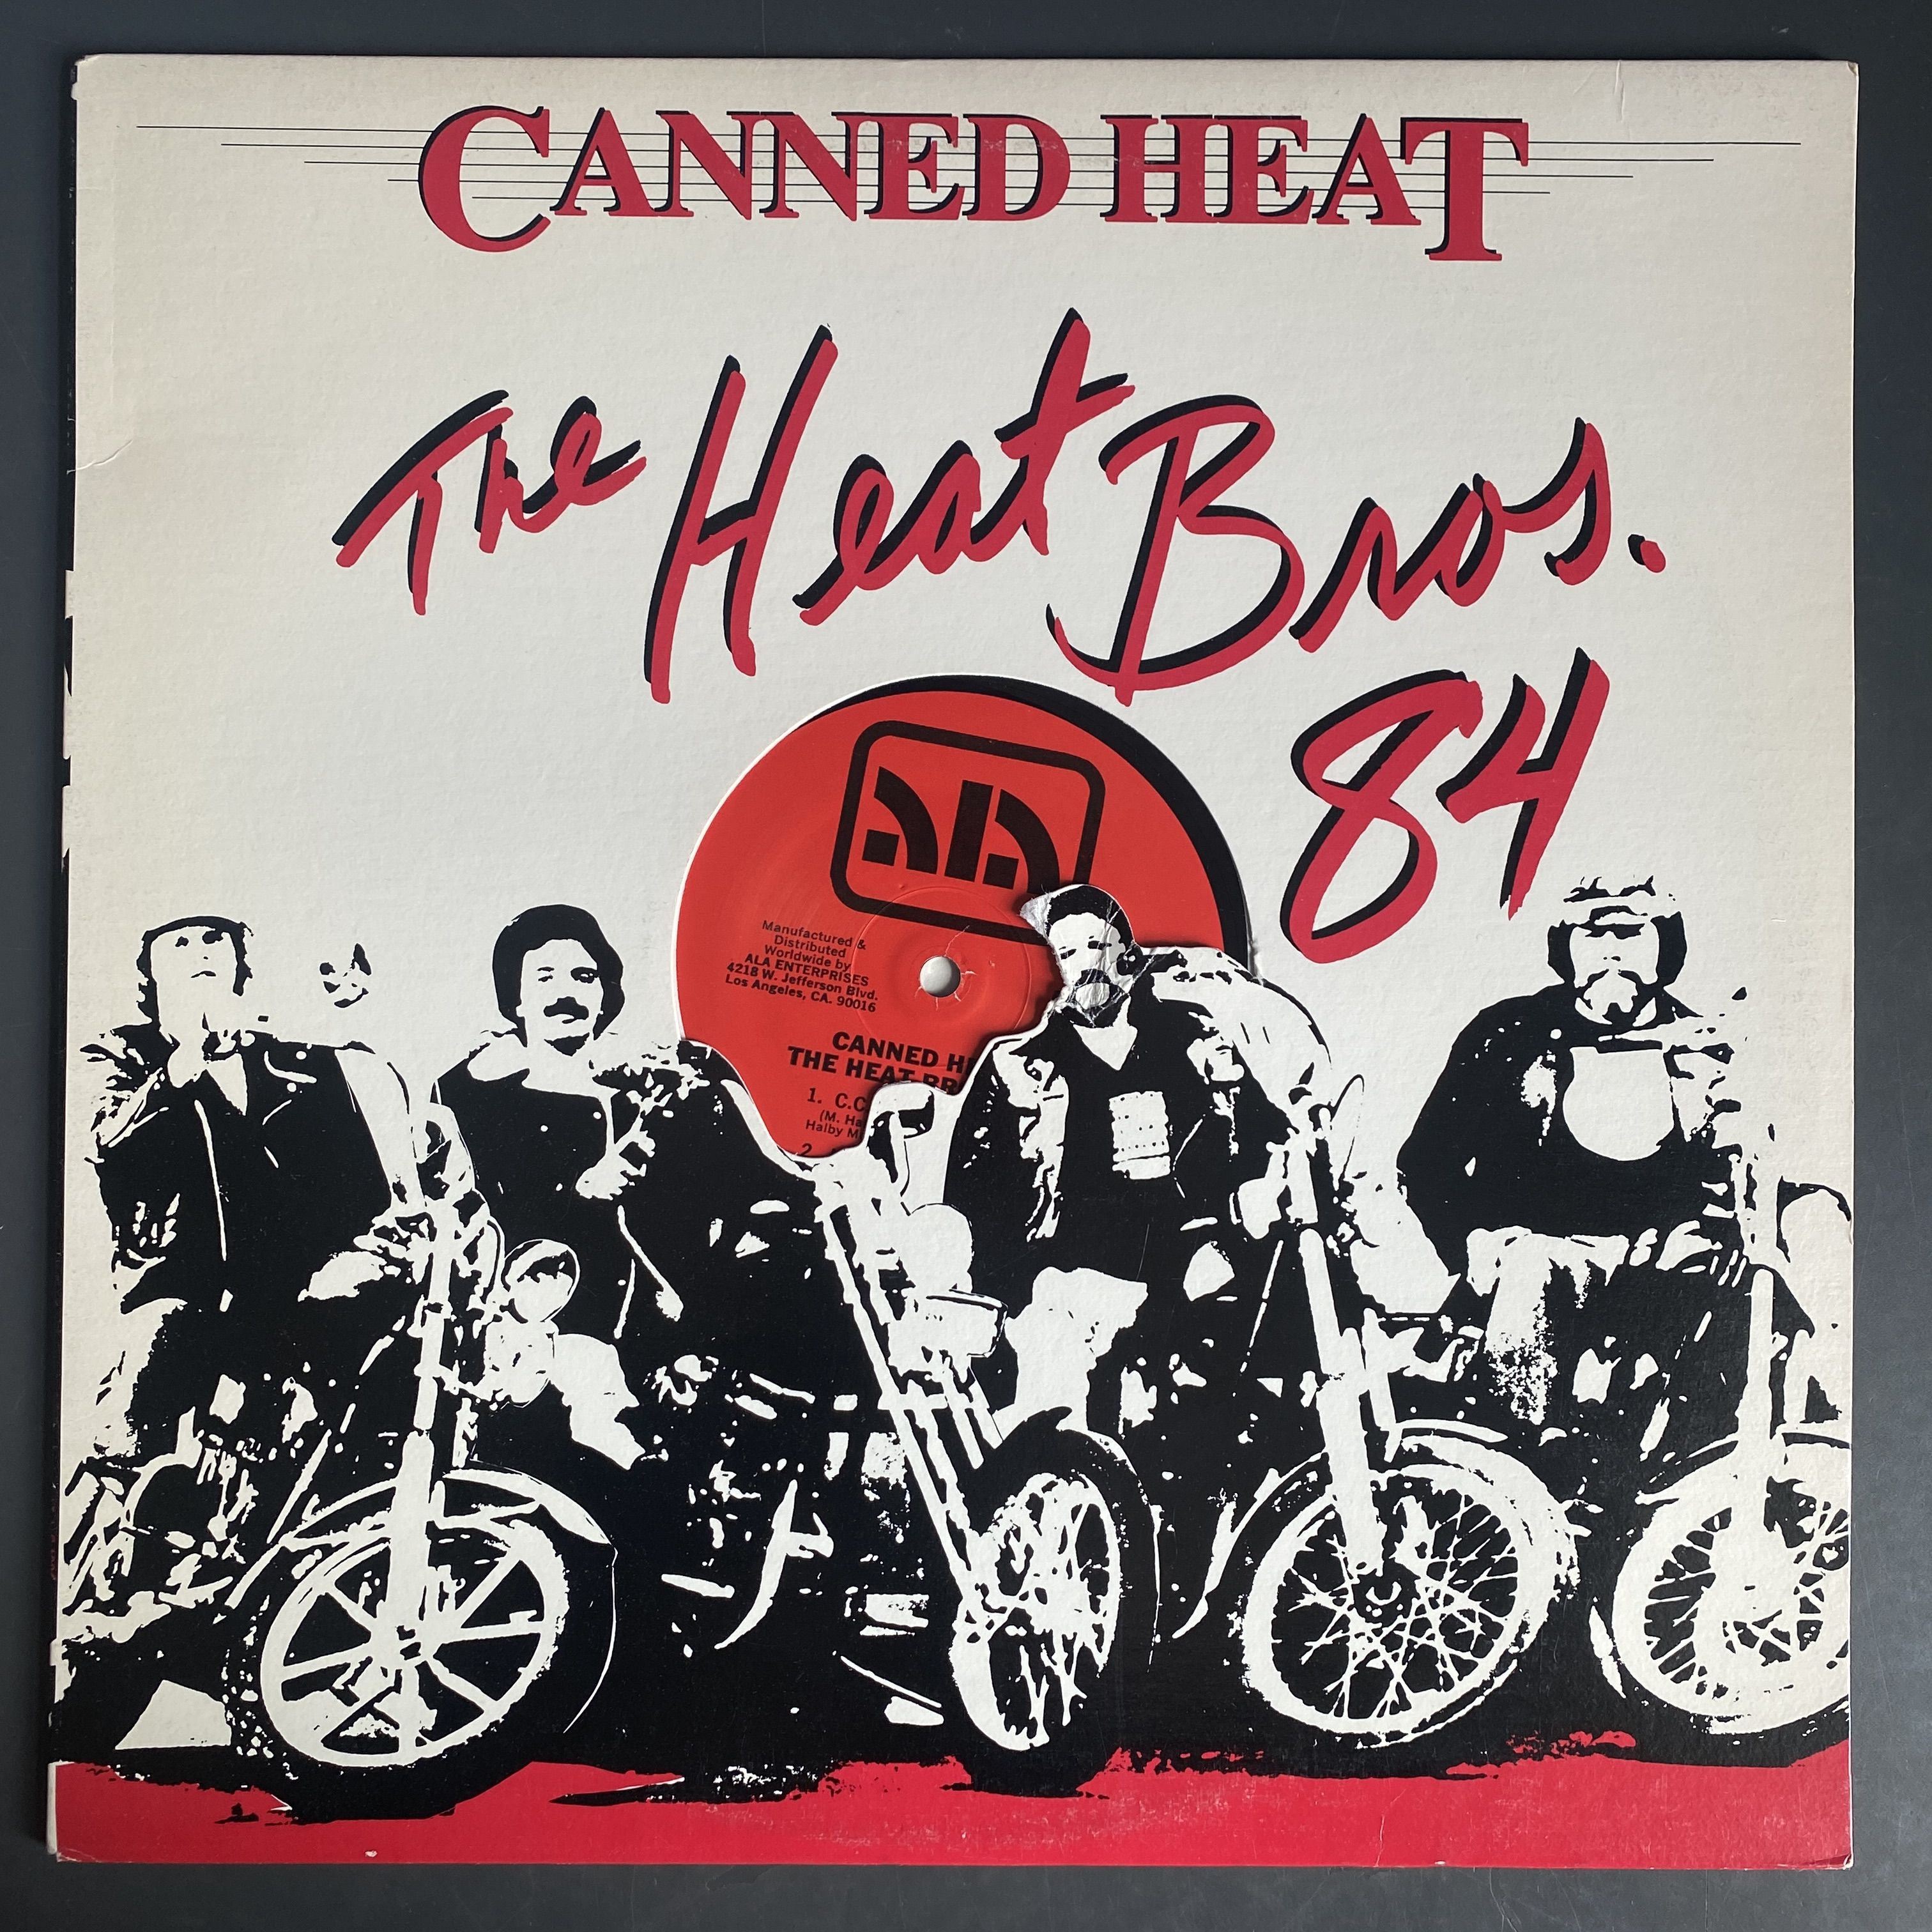 Canned heat steam фото 40